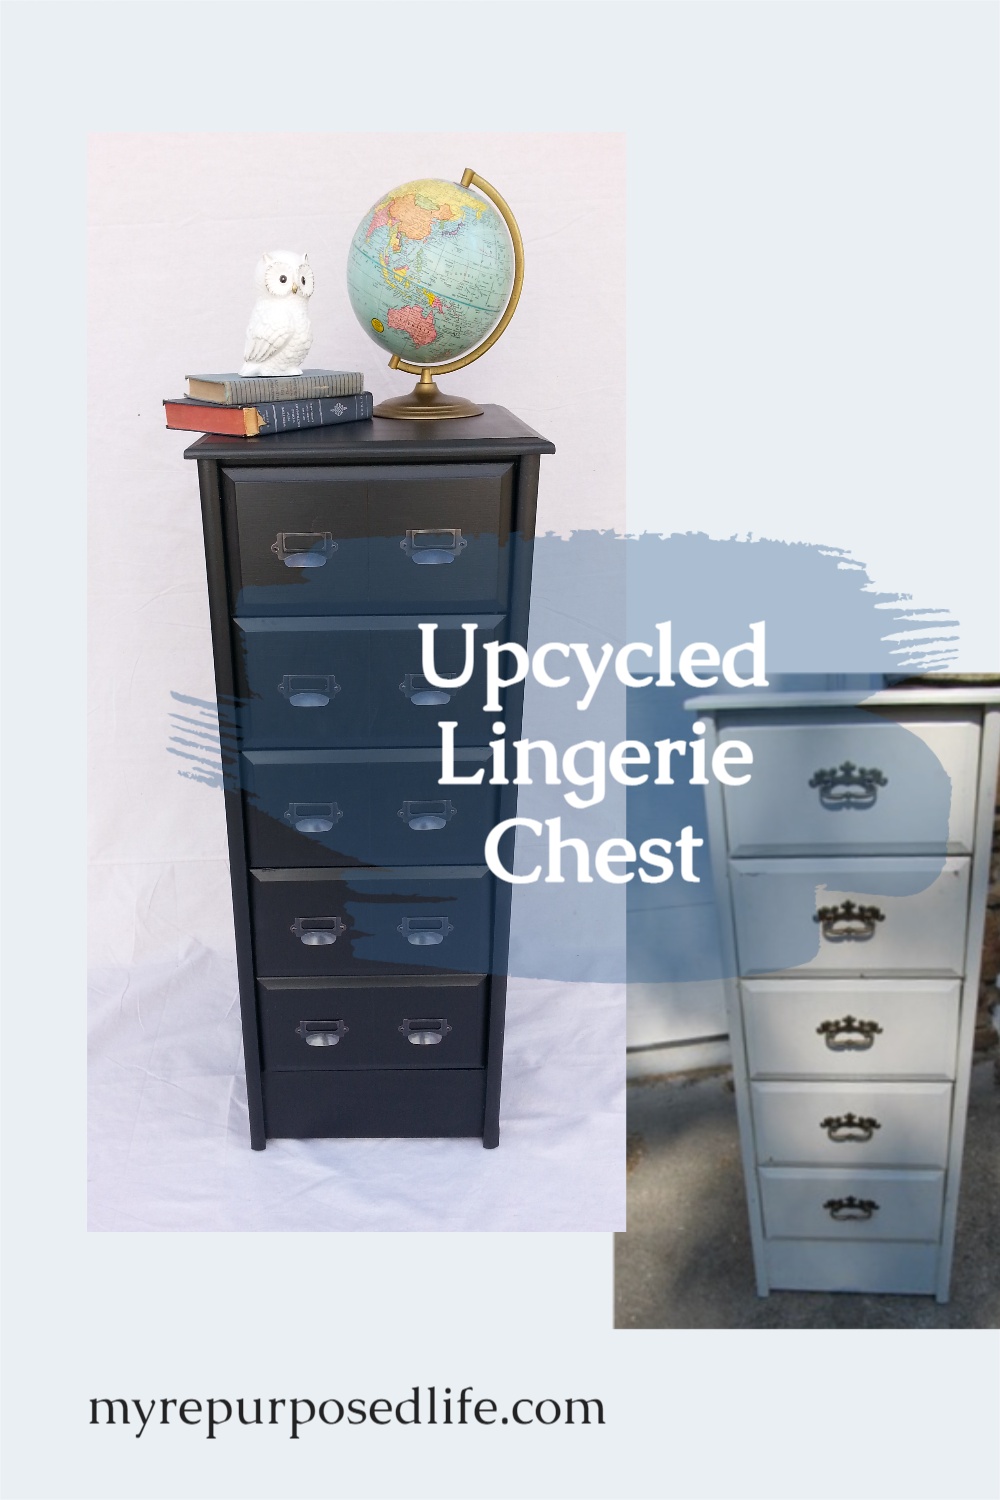 How to upcycle a lingerie cabinet by changing up the drawers, adding hardware and paint. Increase storage by going UP! DIY it this weekend! #MyRepurposedLife #repurposedfurniture #lingeriecabinet #chest #storage #bedroom #office via @repurposedlife